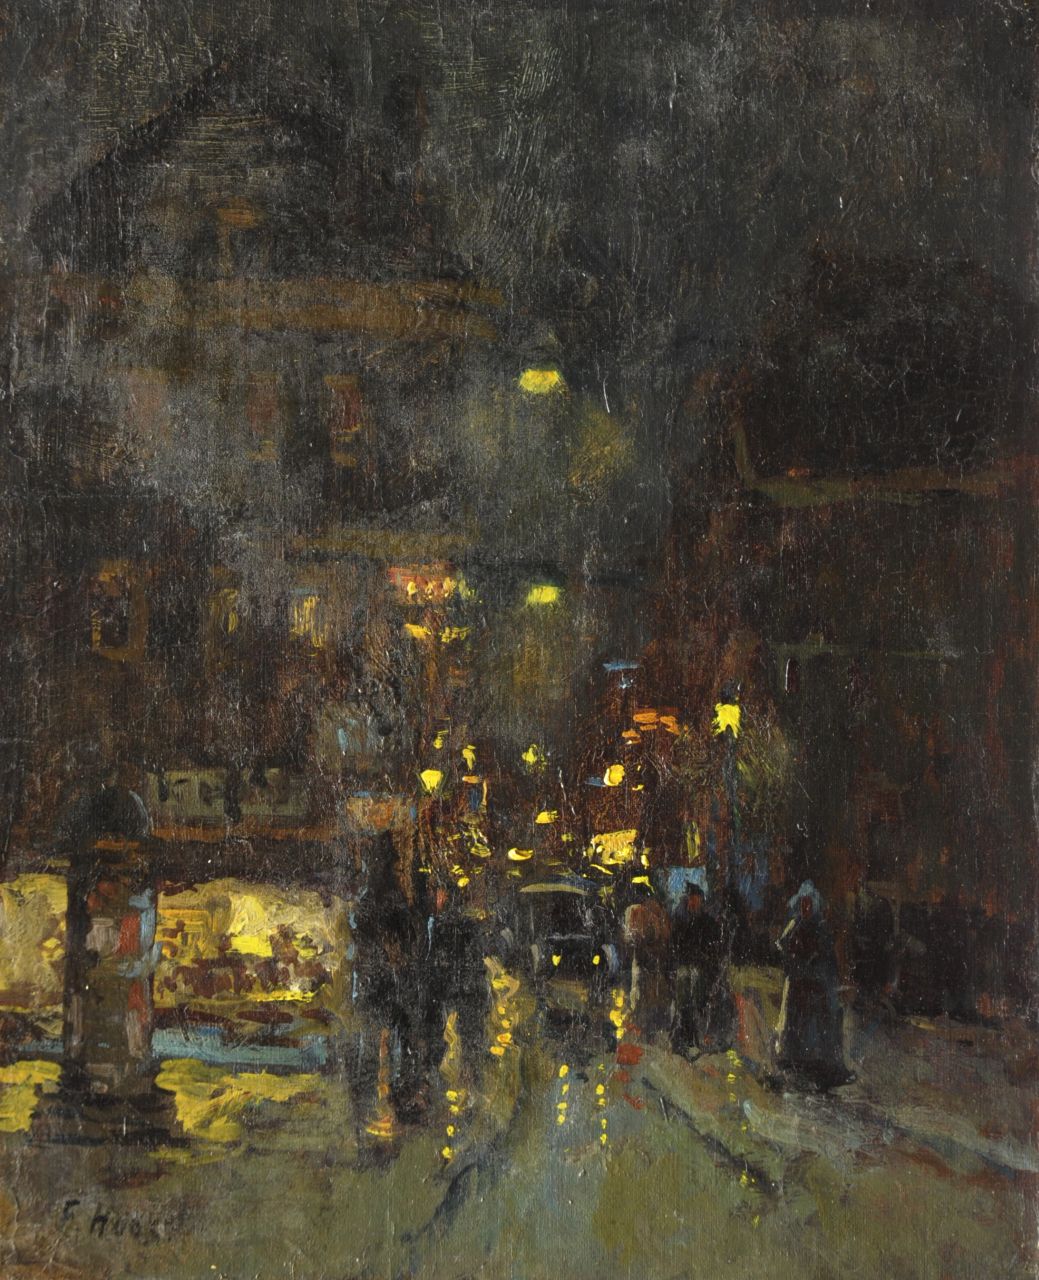 Hoos F.S.  | 'Frans' Simon Hoos, Townview by night, oil on canvas laid down on panel 30.0 x 24.4 cm, signed l.l.